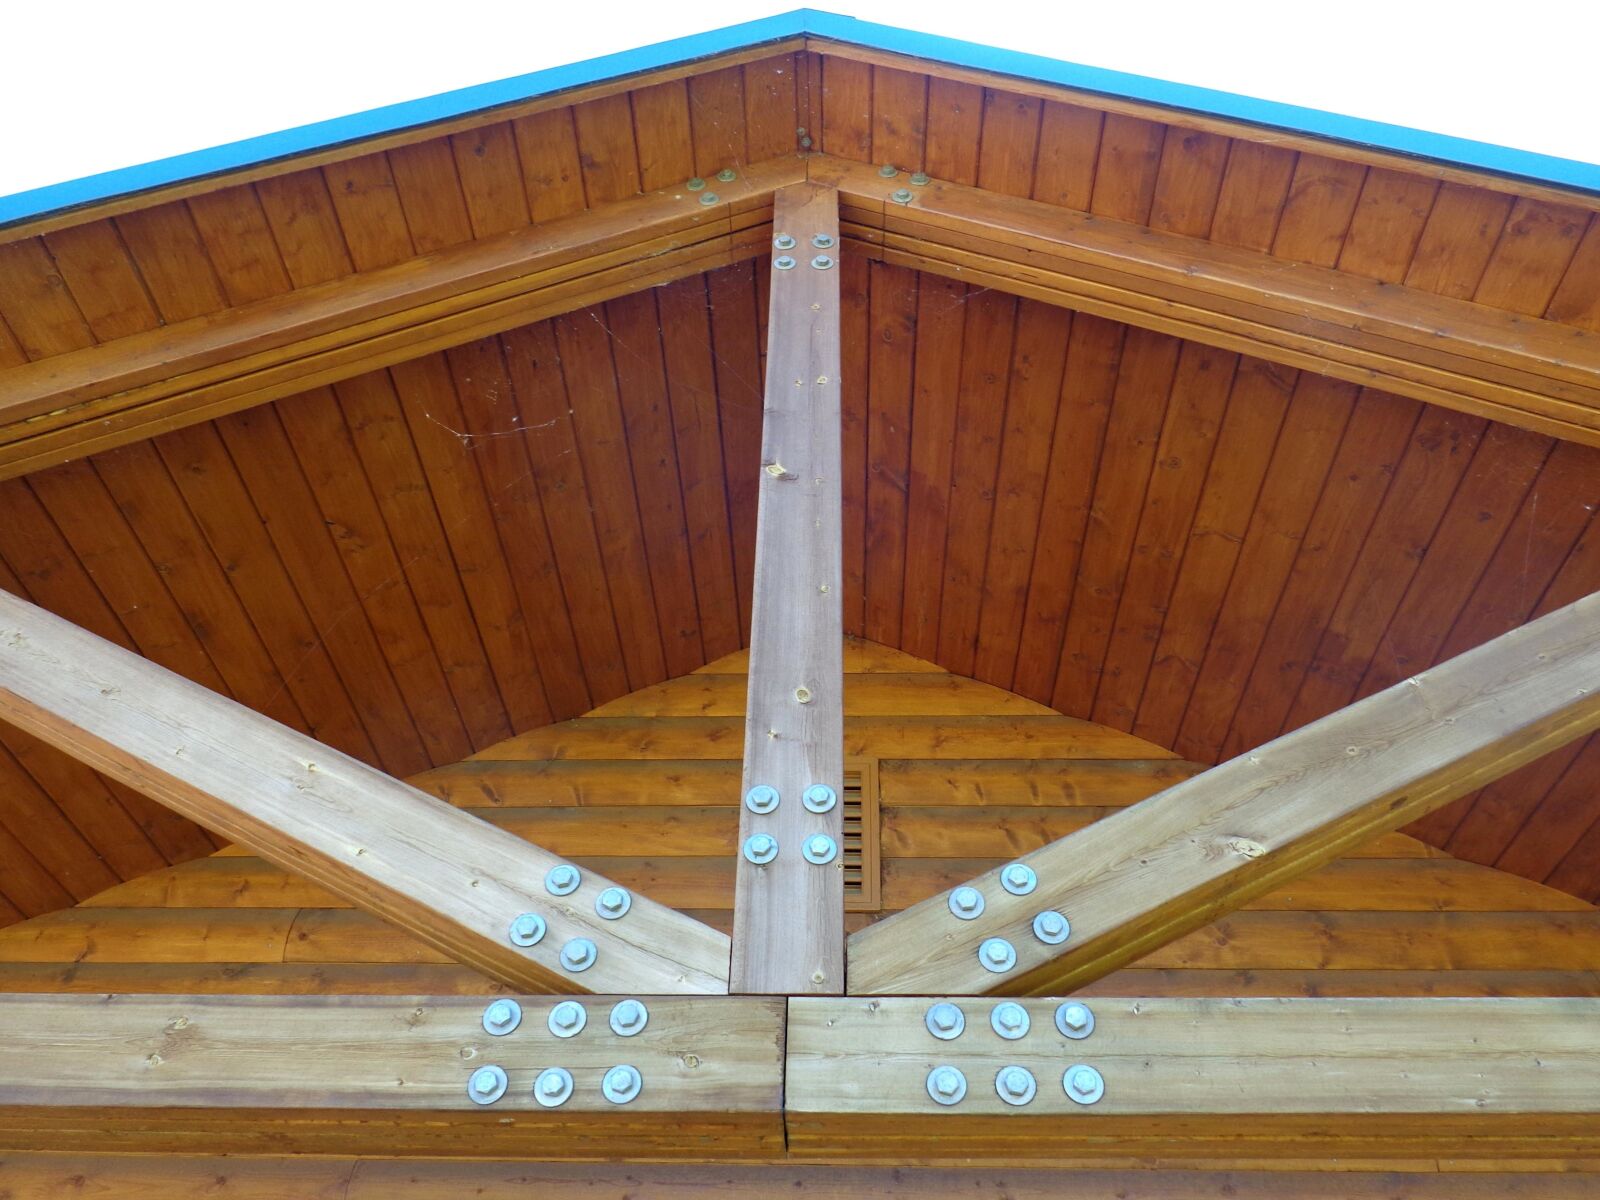 Sony Cyber-shot DSC-W690 sample photo. Wooden roof, support beams photography